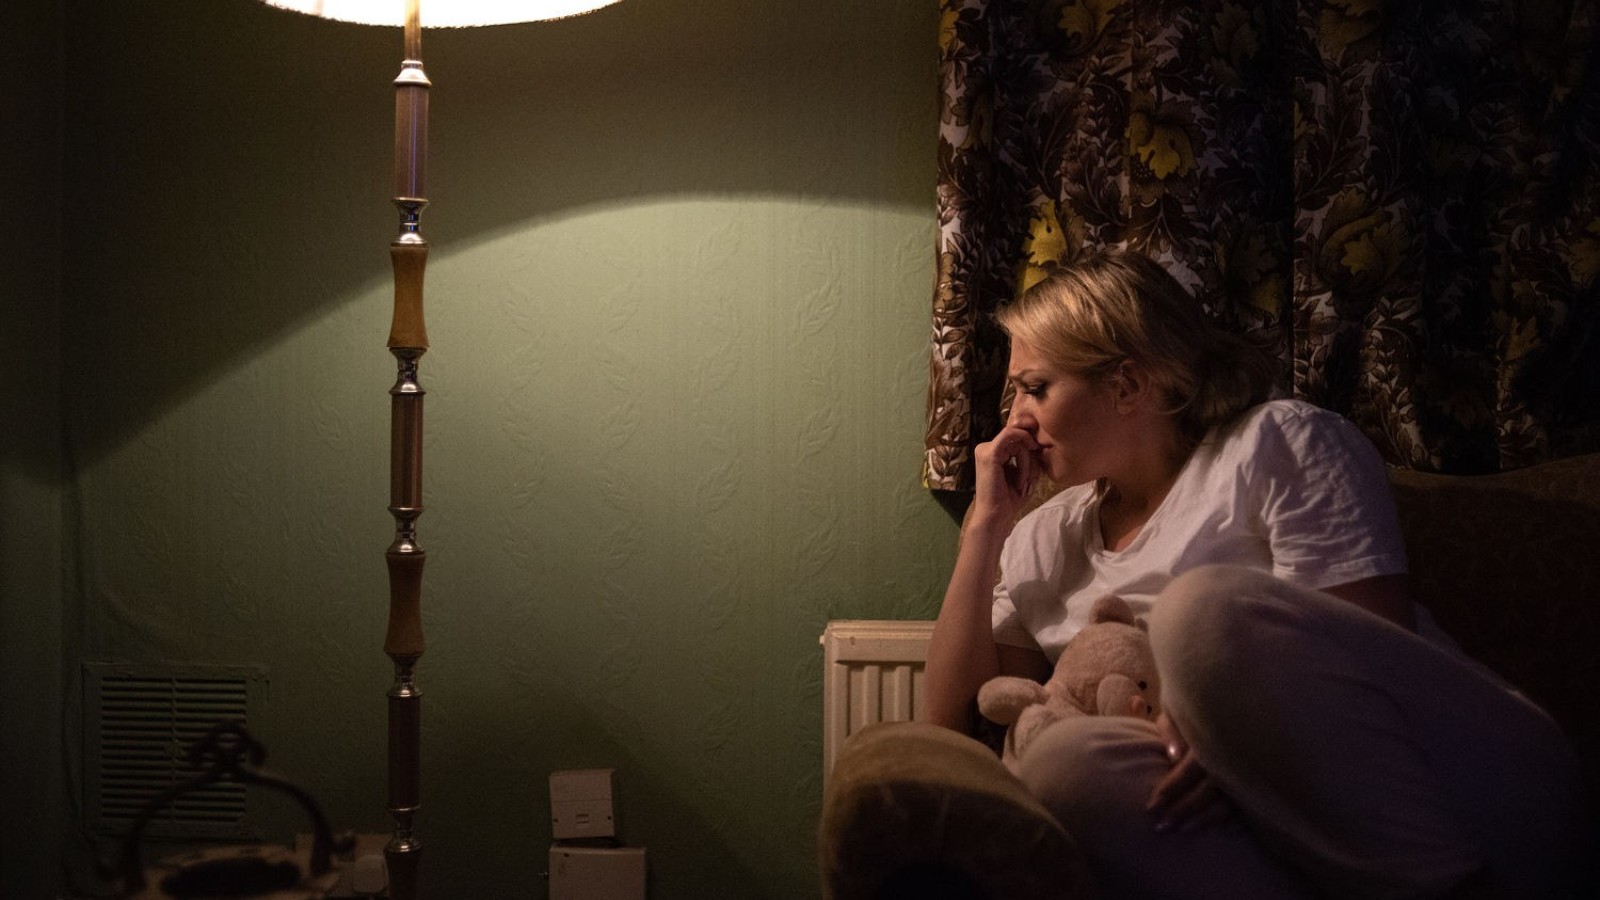 A blonde haired woman sits in a dark living room, lit by a tall standing lamp. Wearing pink pyjamas, she is curled up on the couch. She holds a teddy close with her left arm and her right hand is curled to her face. She looks sad, in distress.